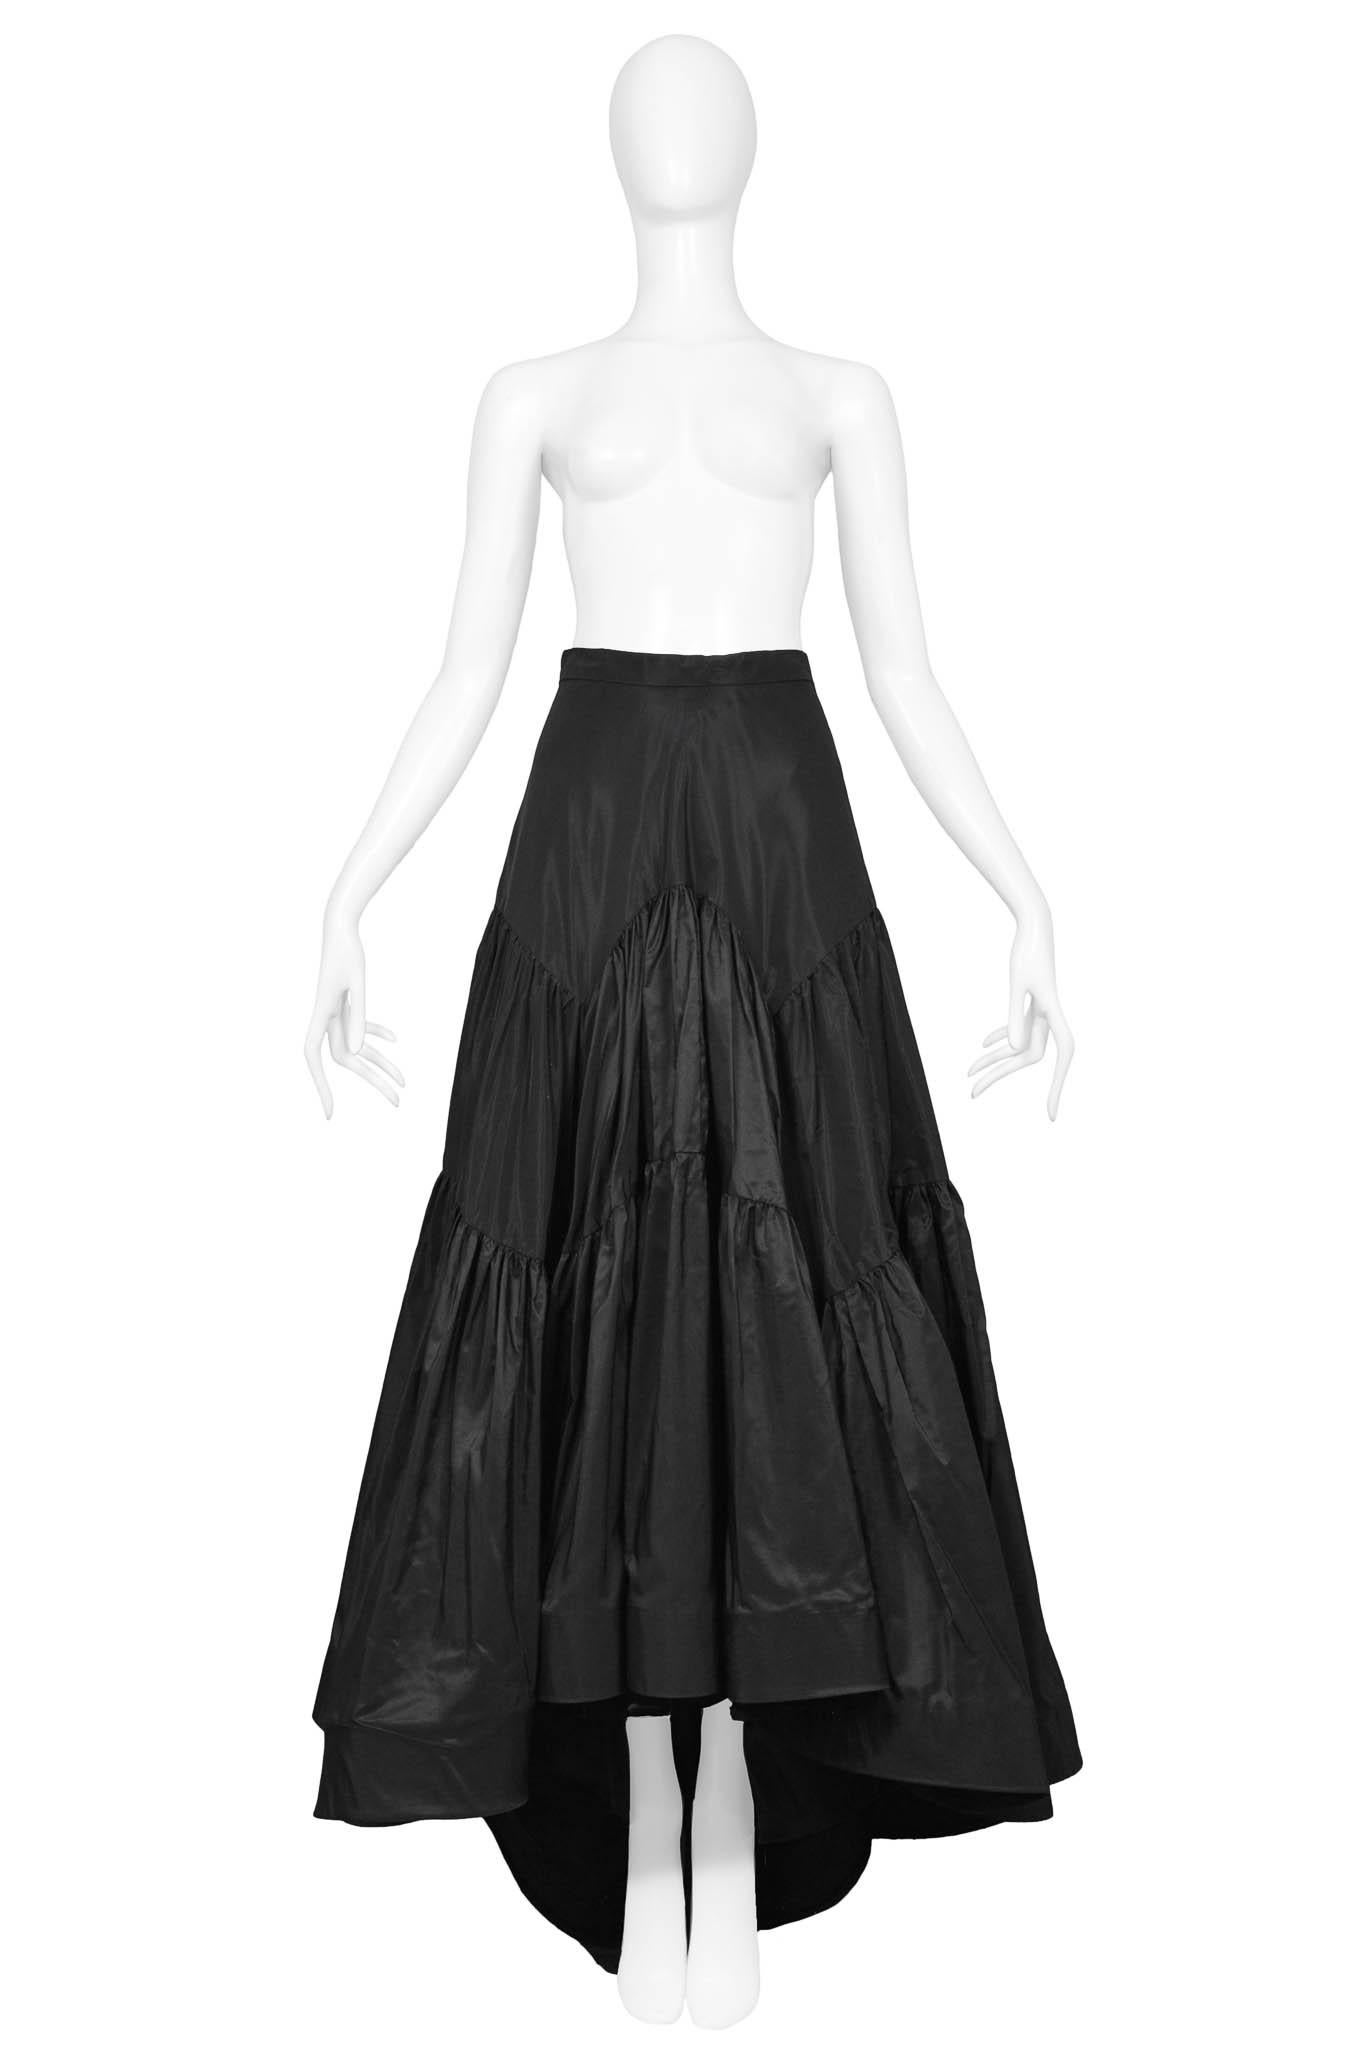 Resurrection Vintage is excited to present a vintage Katy Rodriguez black ballgown dress featuring a high-low hem, voluminous hem, and invisible back zipper

Katy Rodriguez
Size: 4
Waist: 26